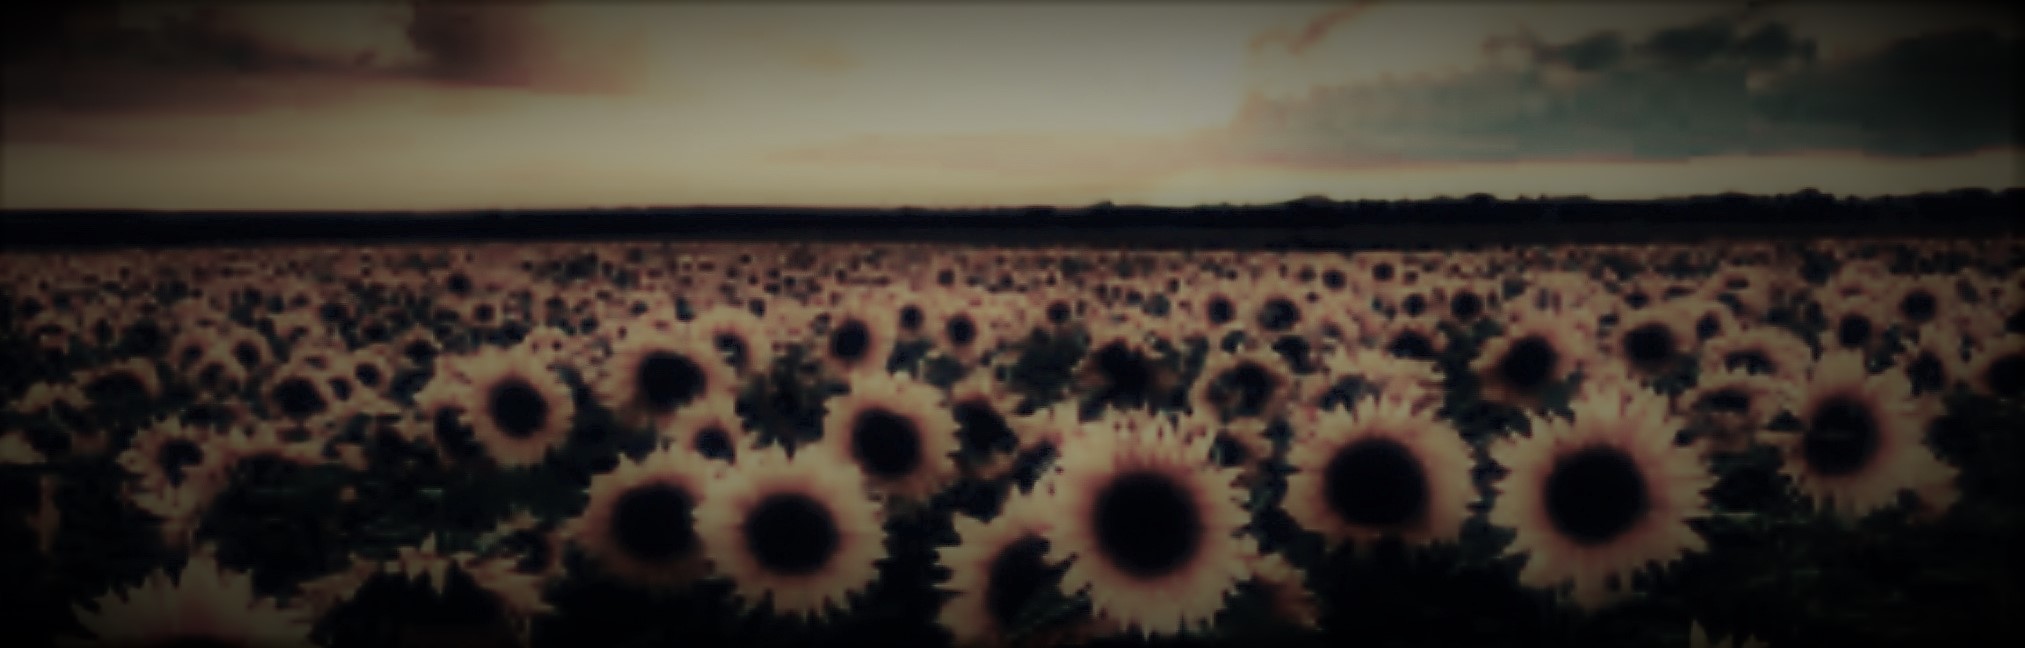 Field of Sunflowers at dusk